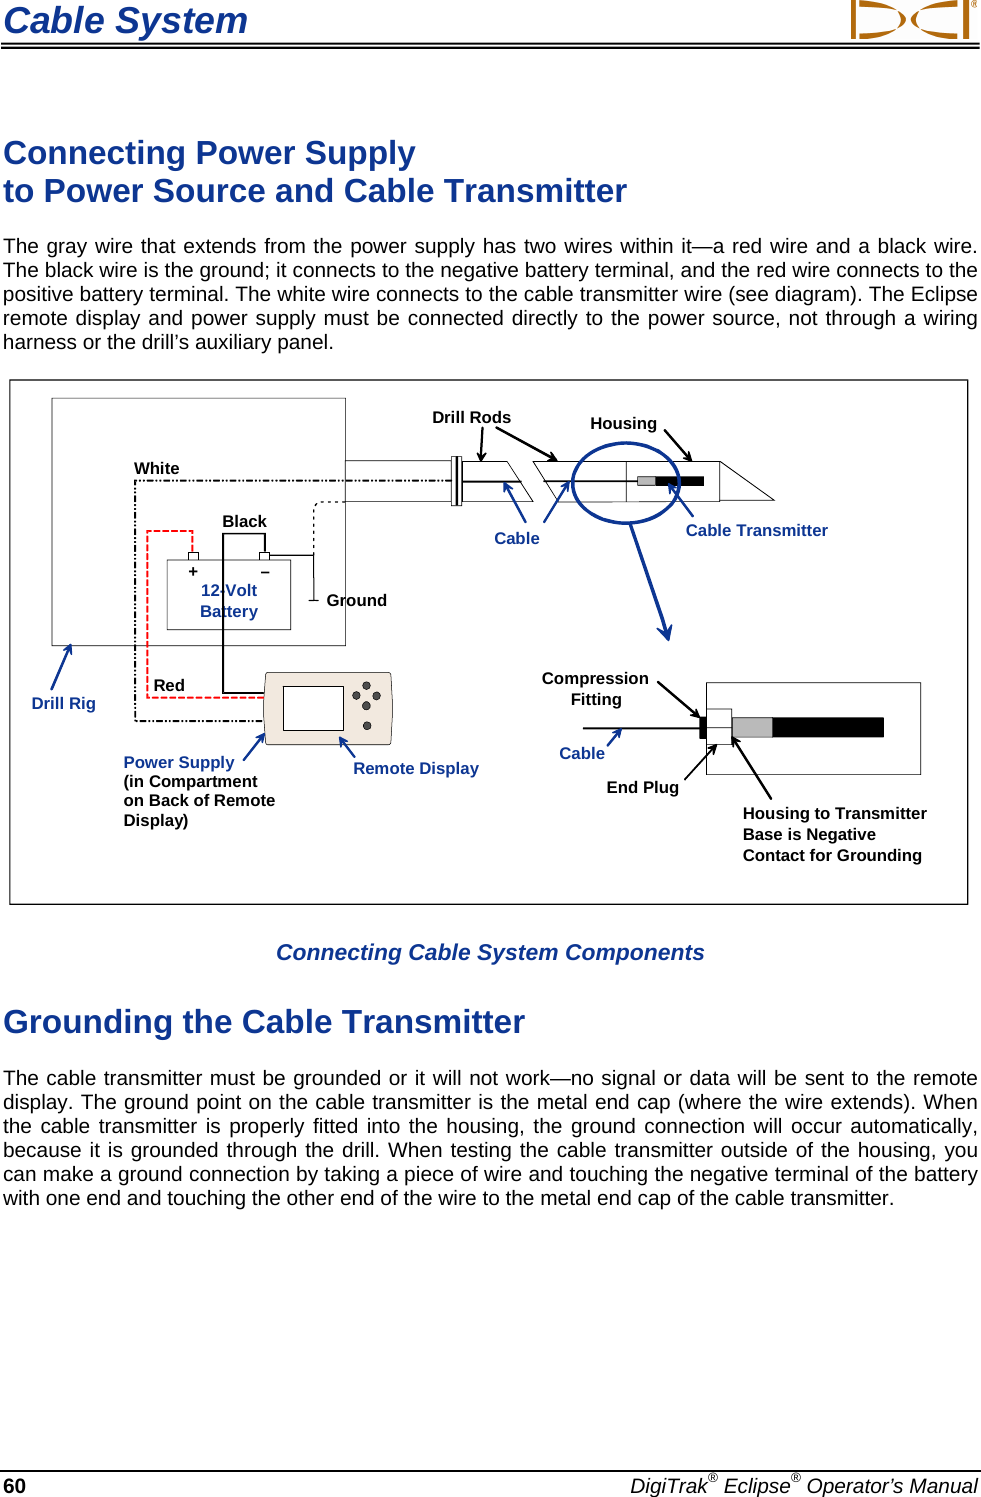 Cable System  Connecting Power Supply  to Power Source and Cable Transmitter The gray wire that extends from the power supply has two wires within it—a red wire and a black wire. The black wire is the ground; it connects to the negative battery terminal, and the red wire connects to the positive battery terminal. The white wire connects to the cable transmitter wire (see diagram). The Eclipse remote display and power supply must be connected directly to the power source, not through a wiring harness or the drill’s auxiliary panel.   12-Volt Battery – + Drill Rig Remote DisplayPower Supply (in Compartment on Back of Remote Display) HousingCable Transmitter Drill RodsCableGroundCompression FittingEnd PlugHousing to Transmitter Base is Negative Contact for GroundingCableWhite Red Black  Connecting Cable System Components Grounding the Cable Transmitter The cable transmitter must be grounded or it will not work—no signal or data will be sent to the remote display. The ground point on the cable transmitter is the metal end cap (where the wire extends). When the cable transmitter is properly fitted into the housing, the ground connection will occur automatically, because it is grounded through the drill. When testing the cable transmitter outside of the housing, you can make a ground connection by taking a piece of wire and touching the negative terminal of the battery with one end and touching the other end of the wire to the metal end cap of the cable transmitter. 60  DigiTrak® Eclipse® Operator’s Manual 